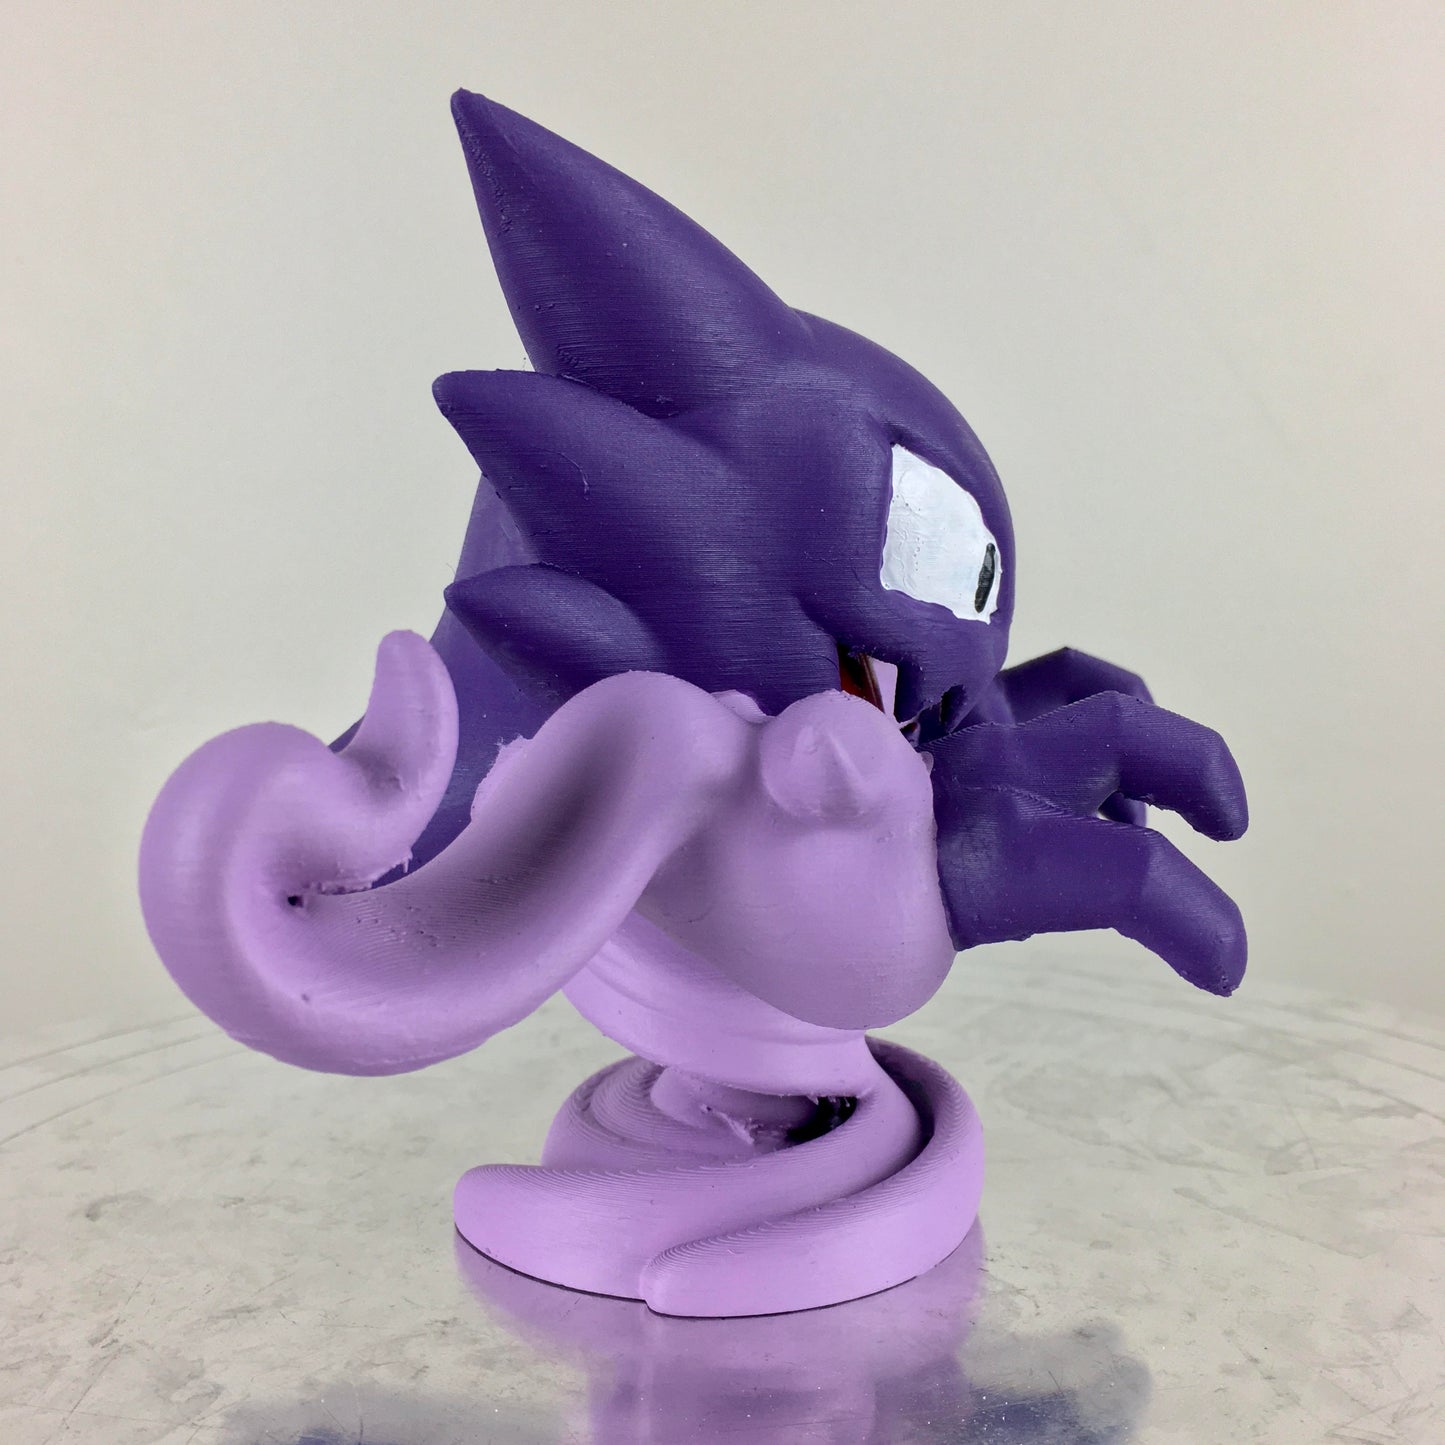 Haunter Figure 3D Printed Hand Painted